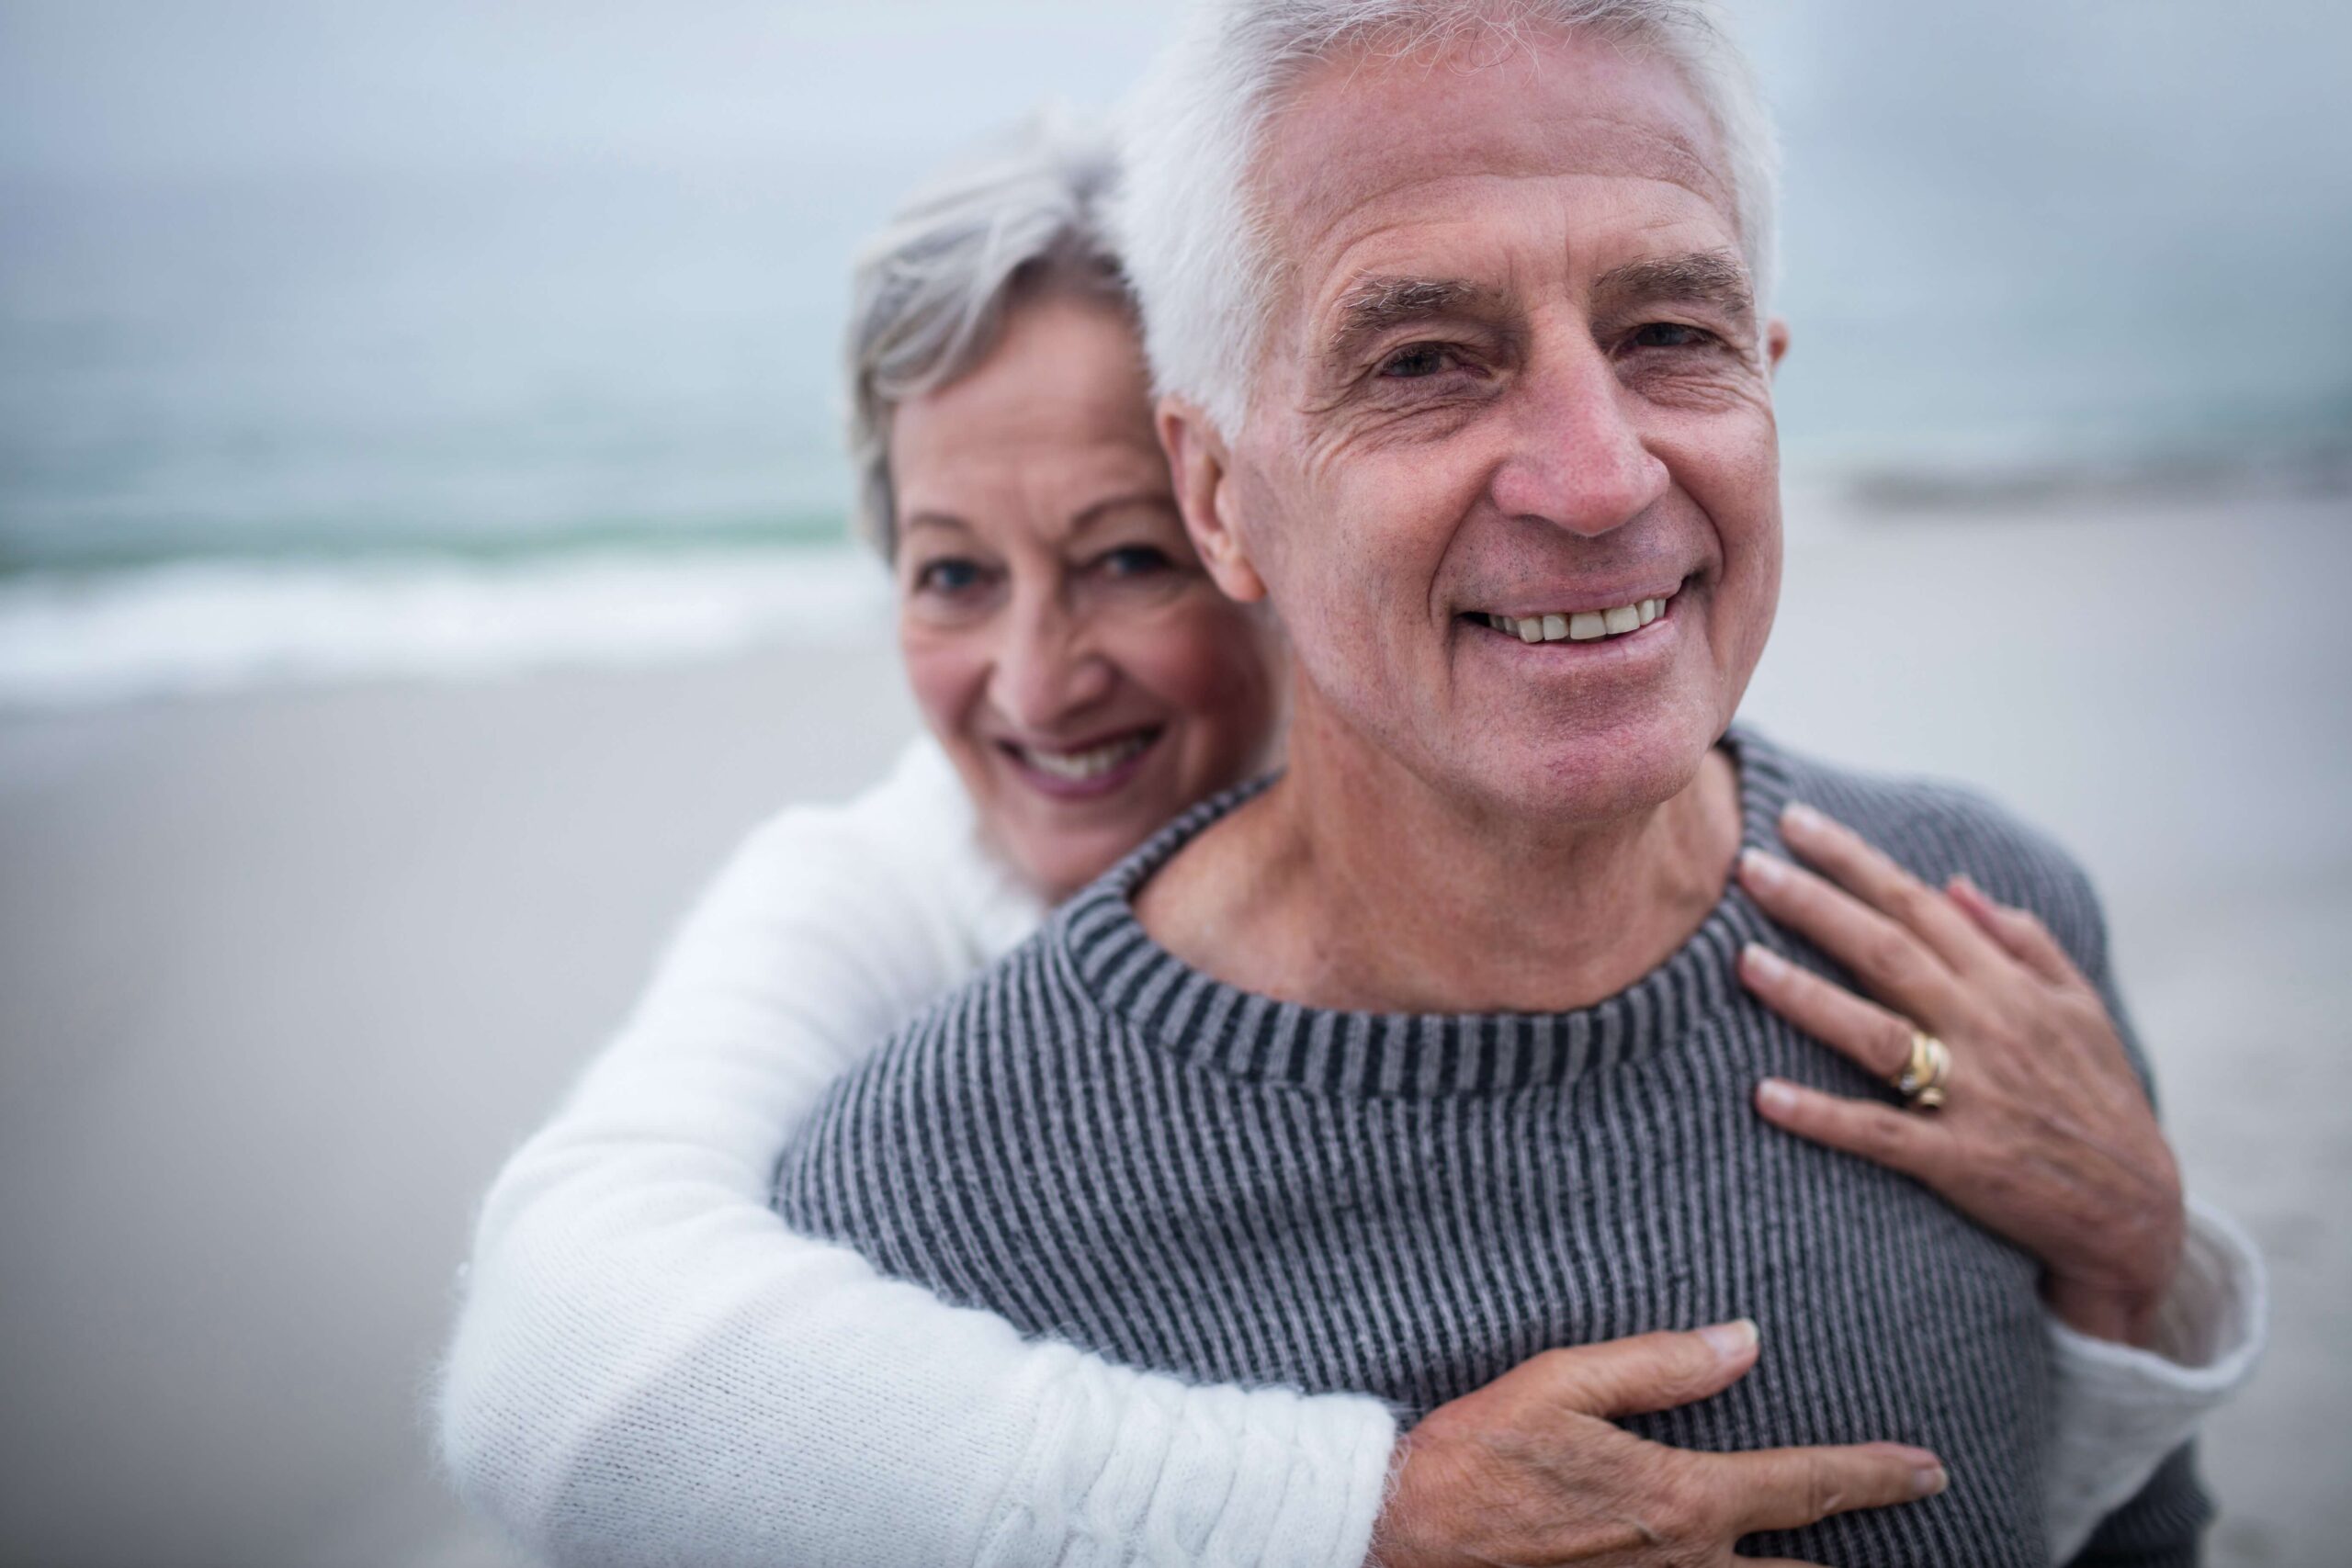 This photo captures a tender moment between a senior couple on the beach, symbolizing their continued enjoyment of life's simple pleasures, unhindered by neuropathic pain, thanks to the supportive role of acupuncture in their health regimen.